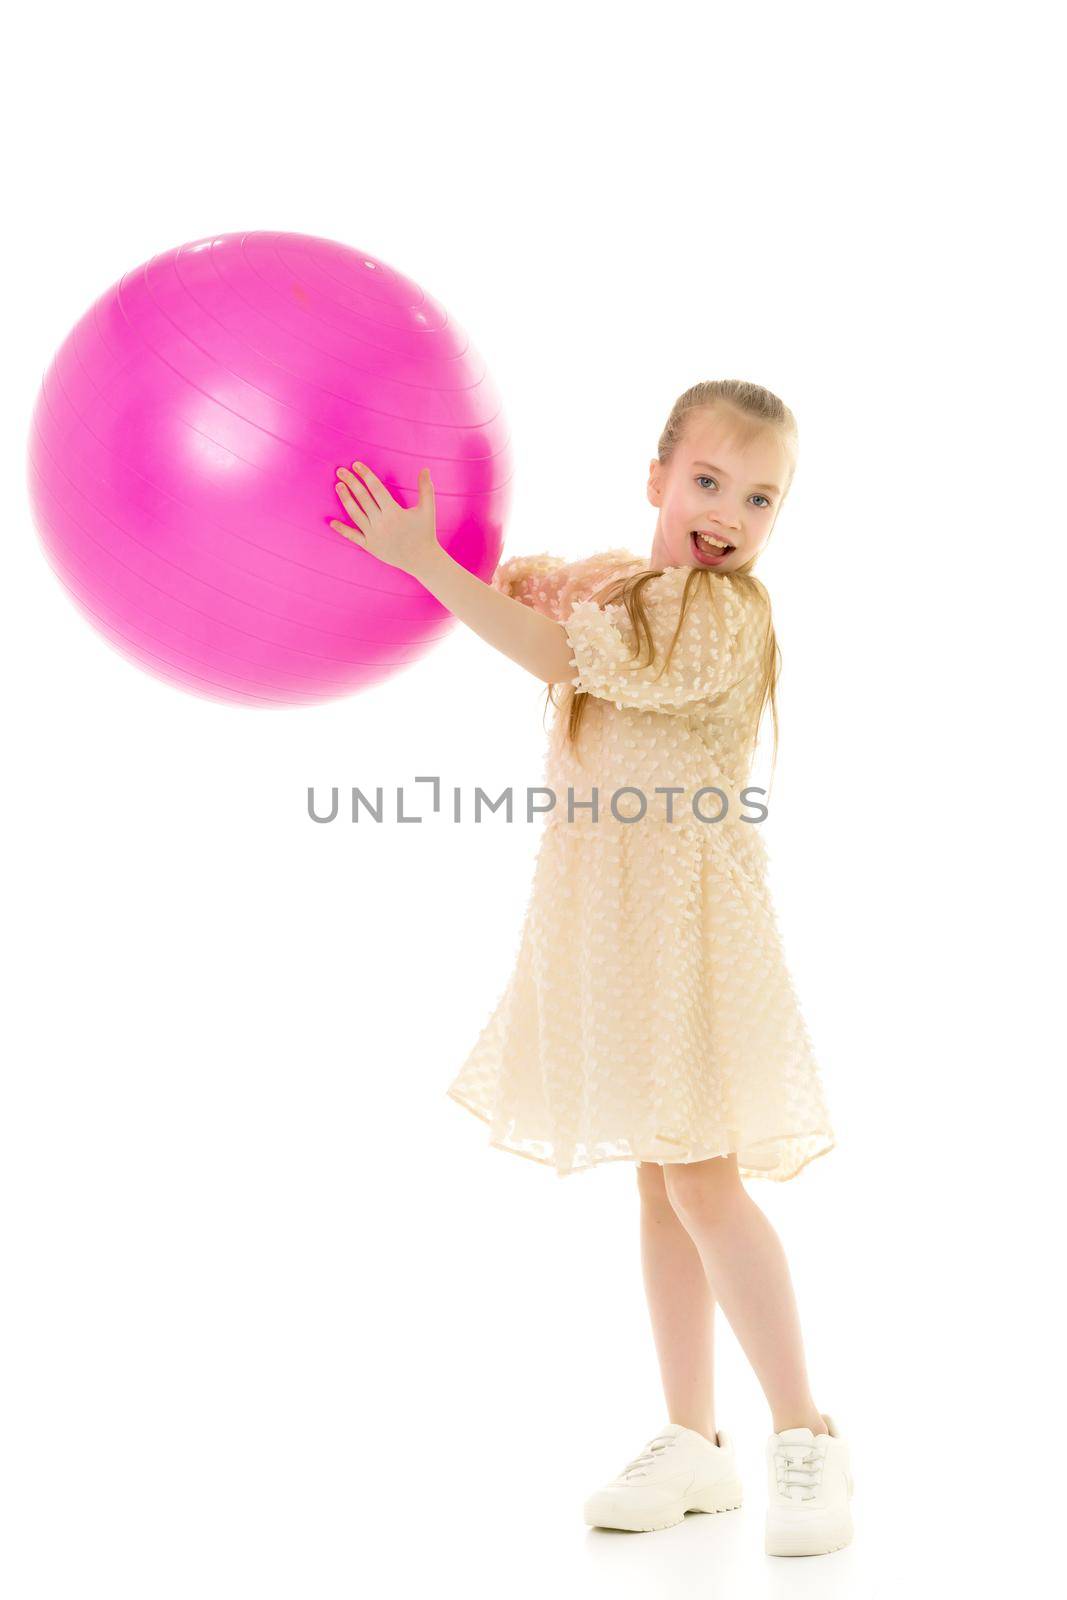 Little girl plays with a big ball for fitness by kolesnikov_studio